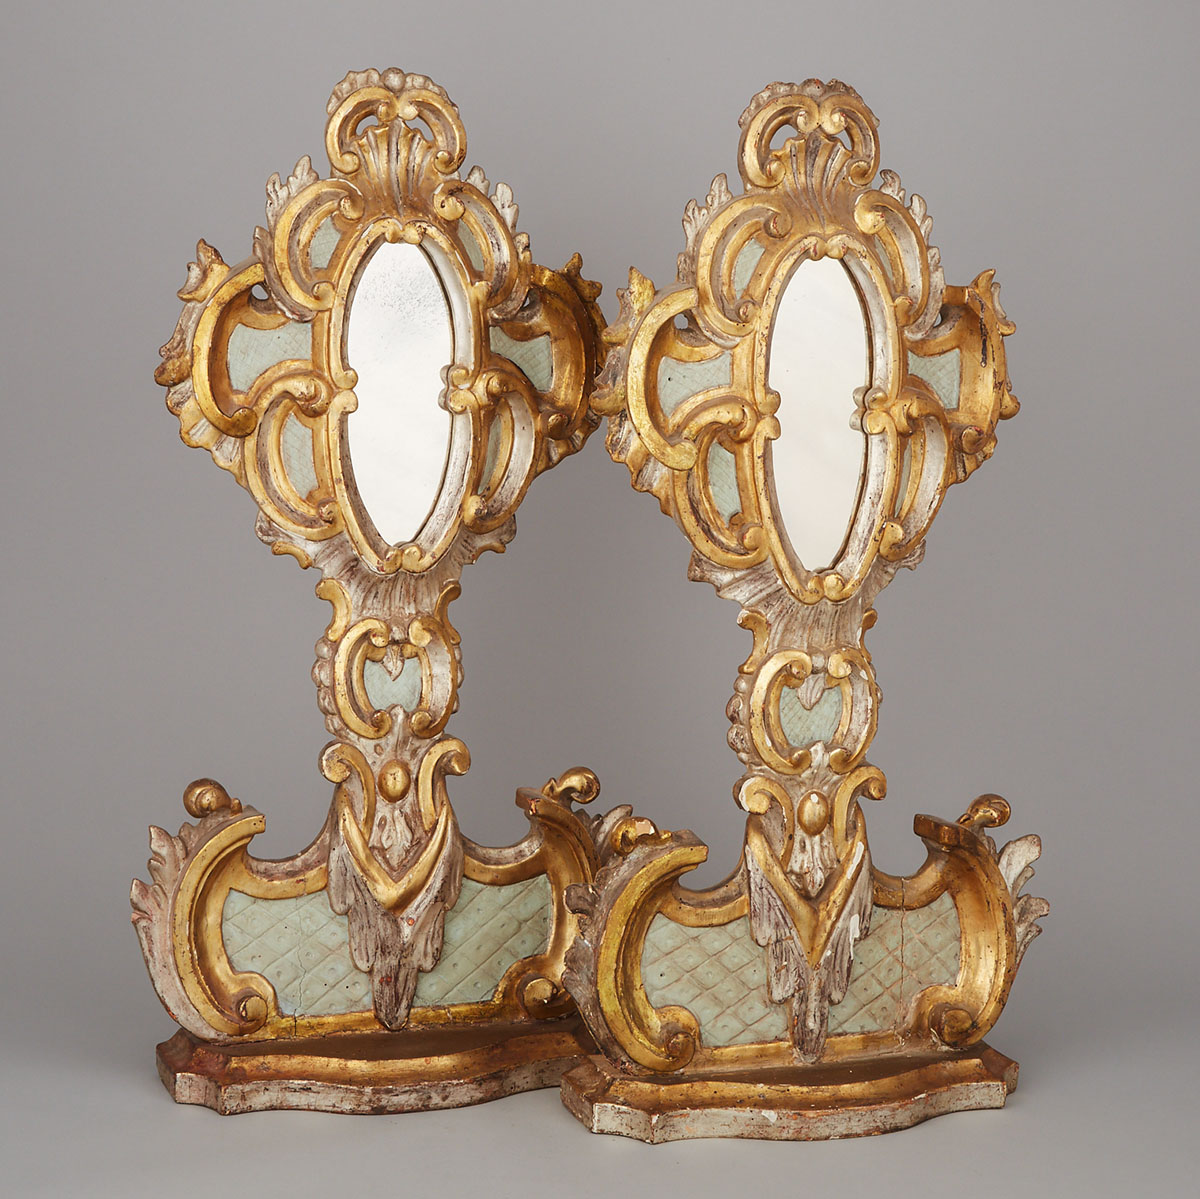 Pair of North Italian Gilt, Silvered and Painted Wood Mirrored Altar Stands, 19th/early 20th century